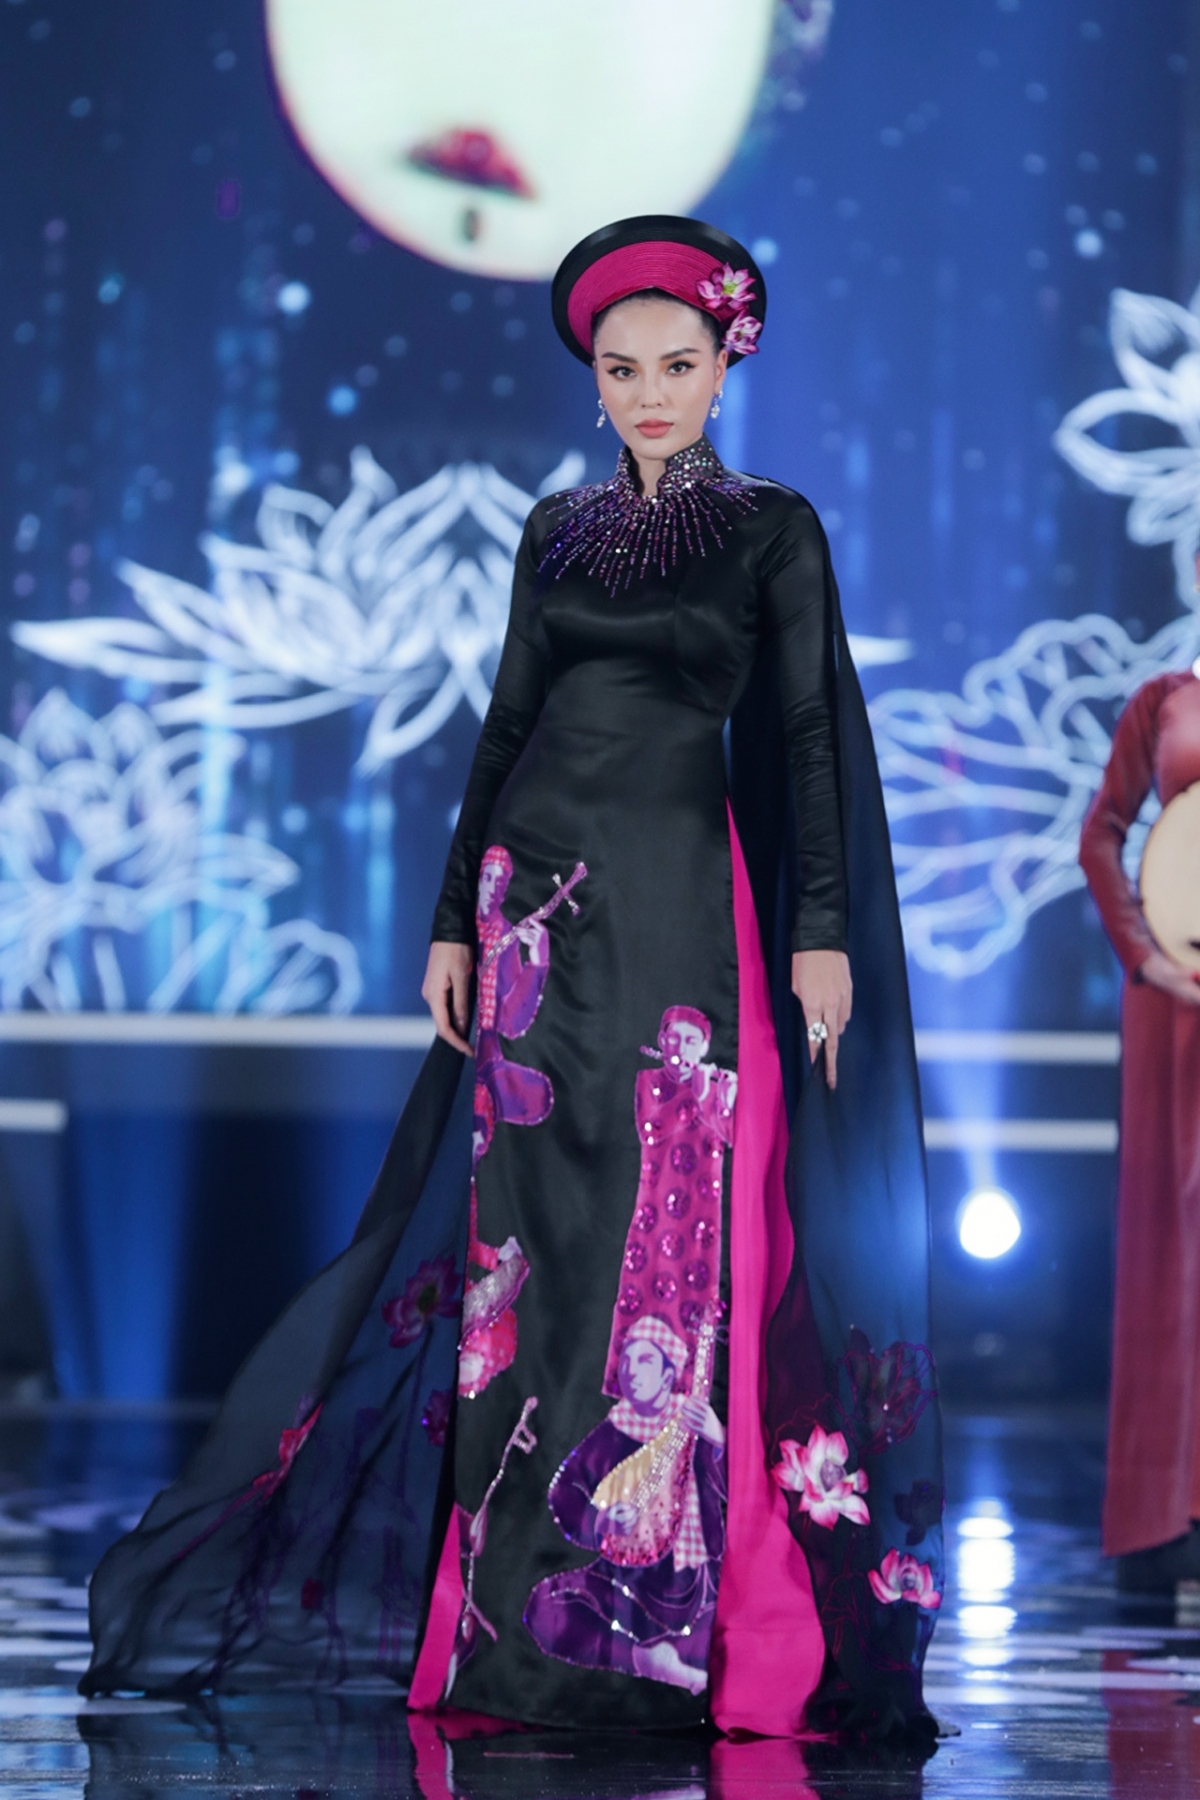 Ky Duyen, Miss Vietnam 2014 winner, appears in an Ao Dai inspired by Don ca tai tu, the musical art form recognised by UNESCO as an intangible part of local cultural heritage.